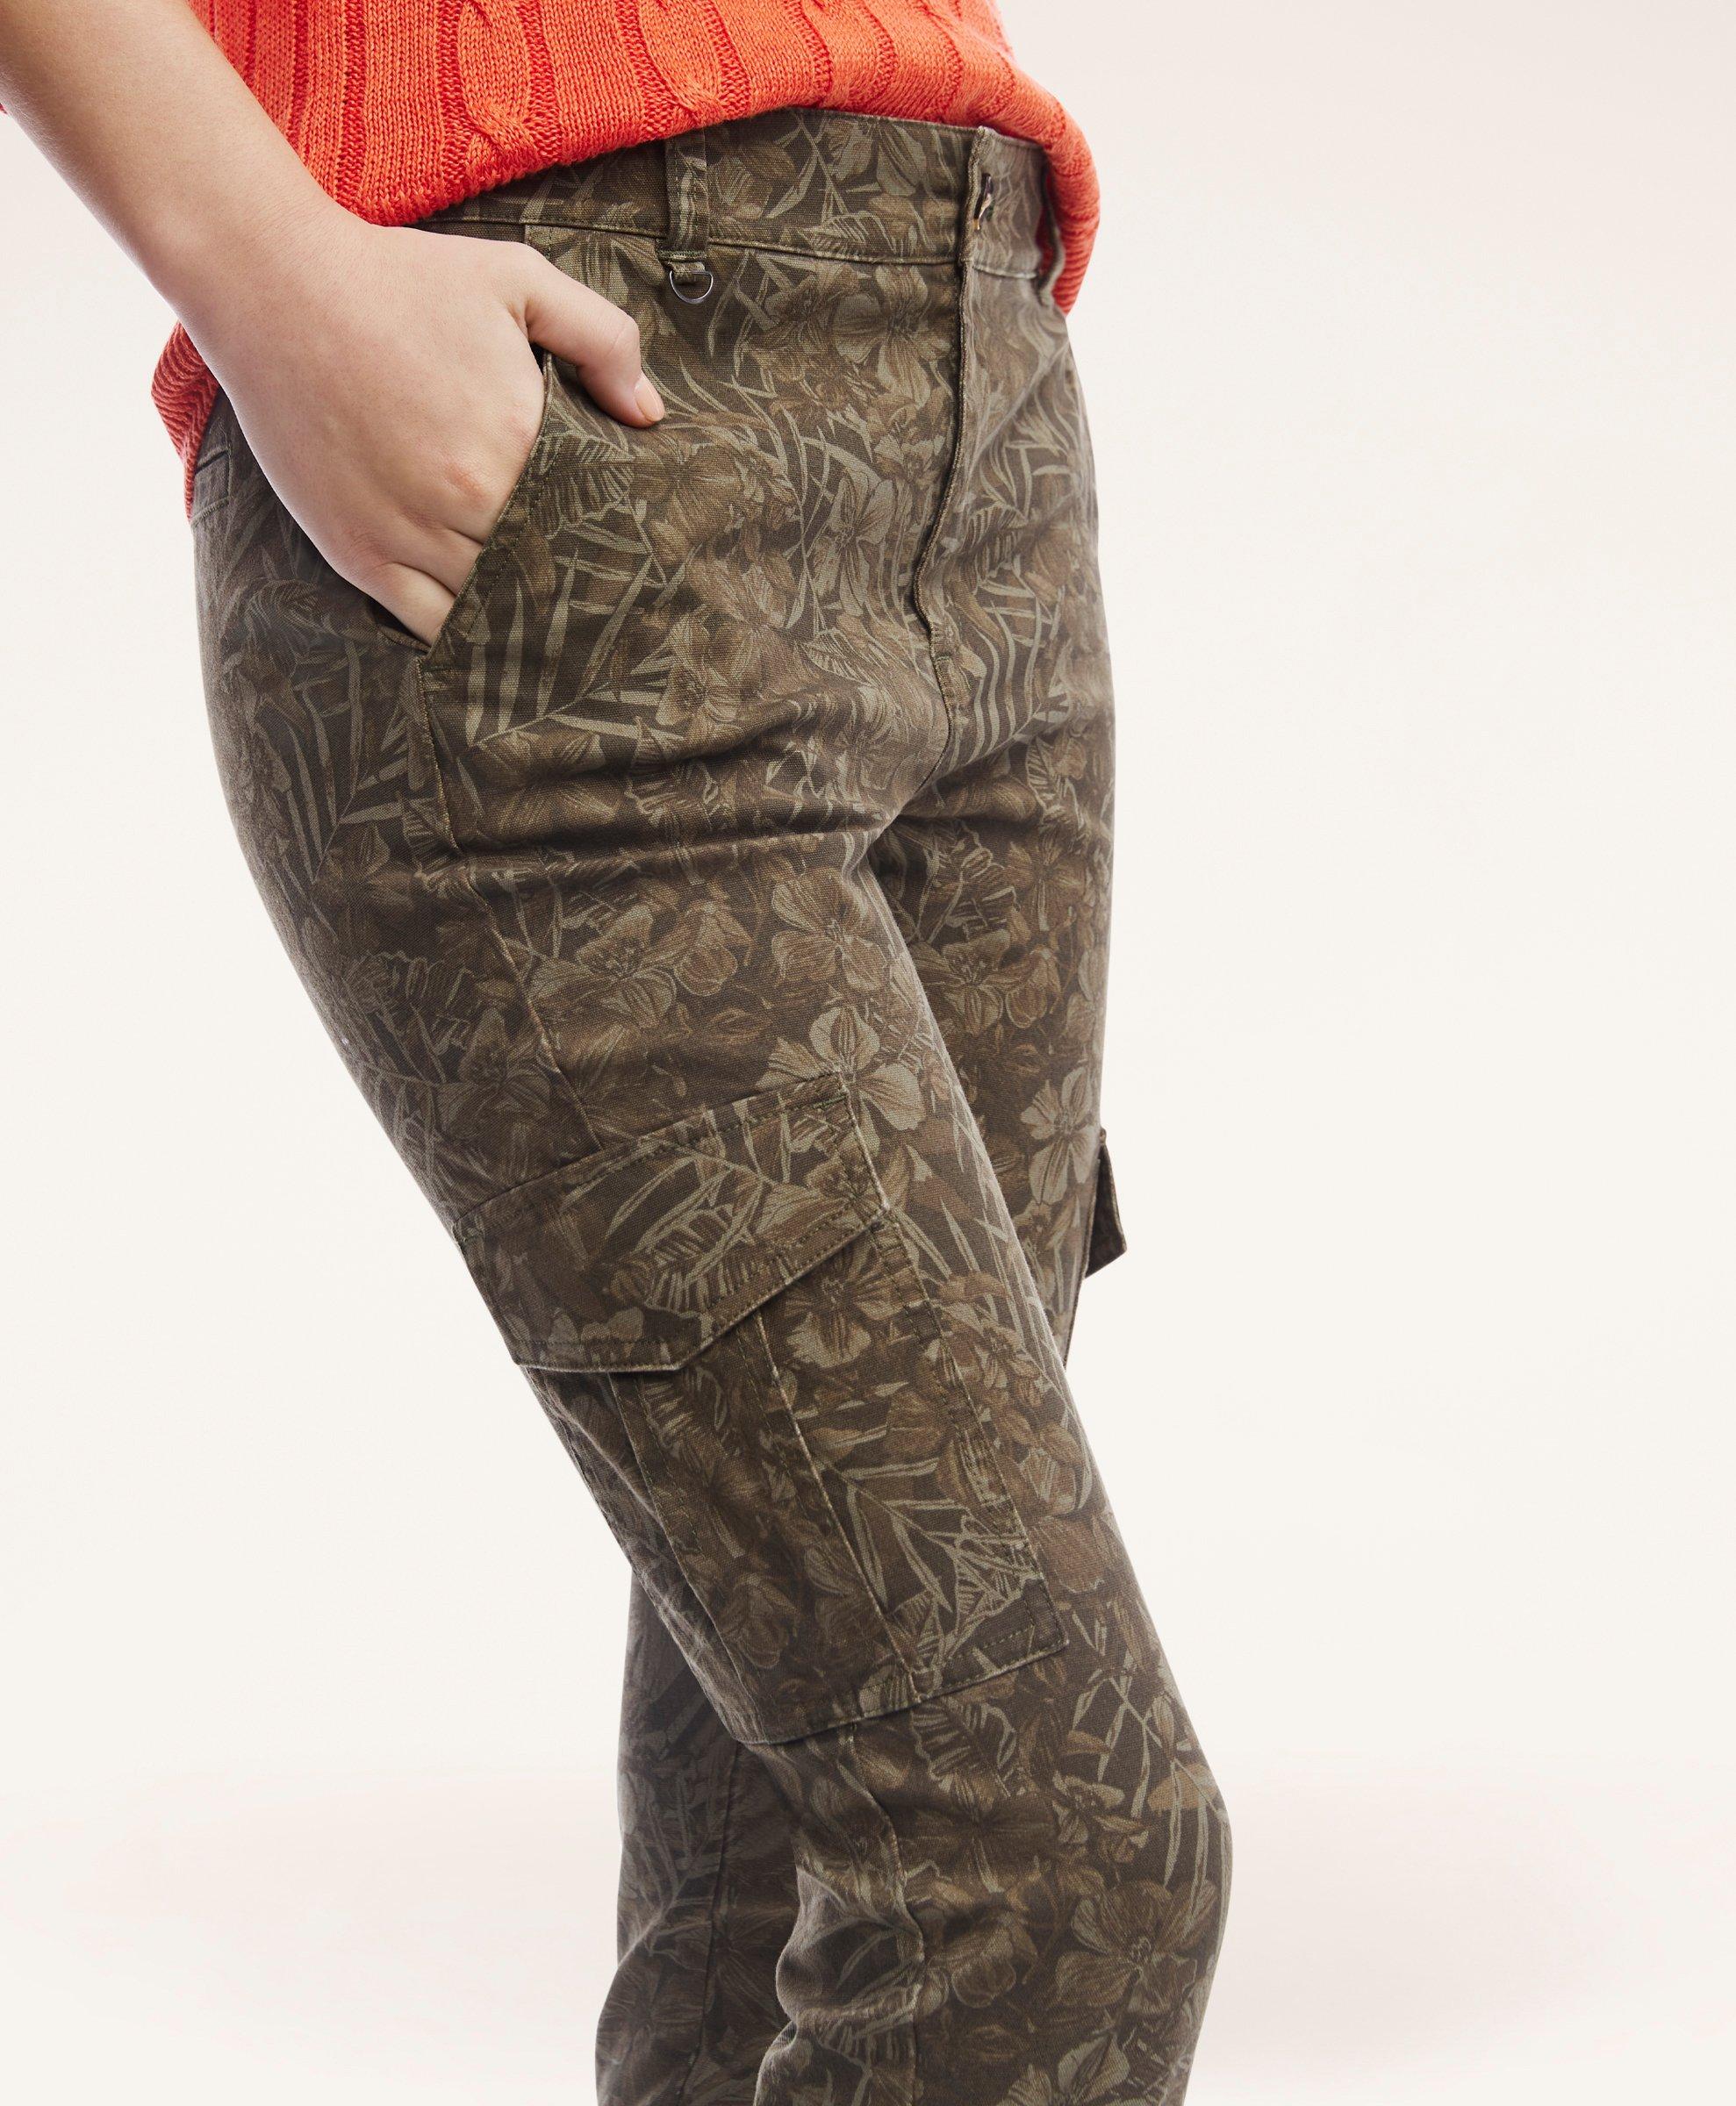 Stretch Cotton Cargo Pants For Women